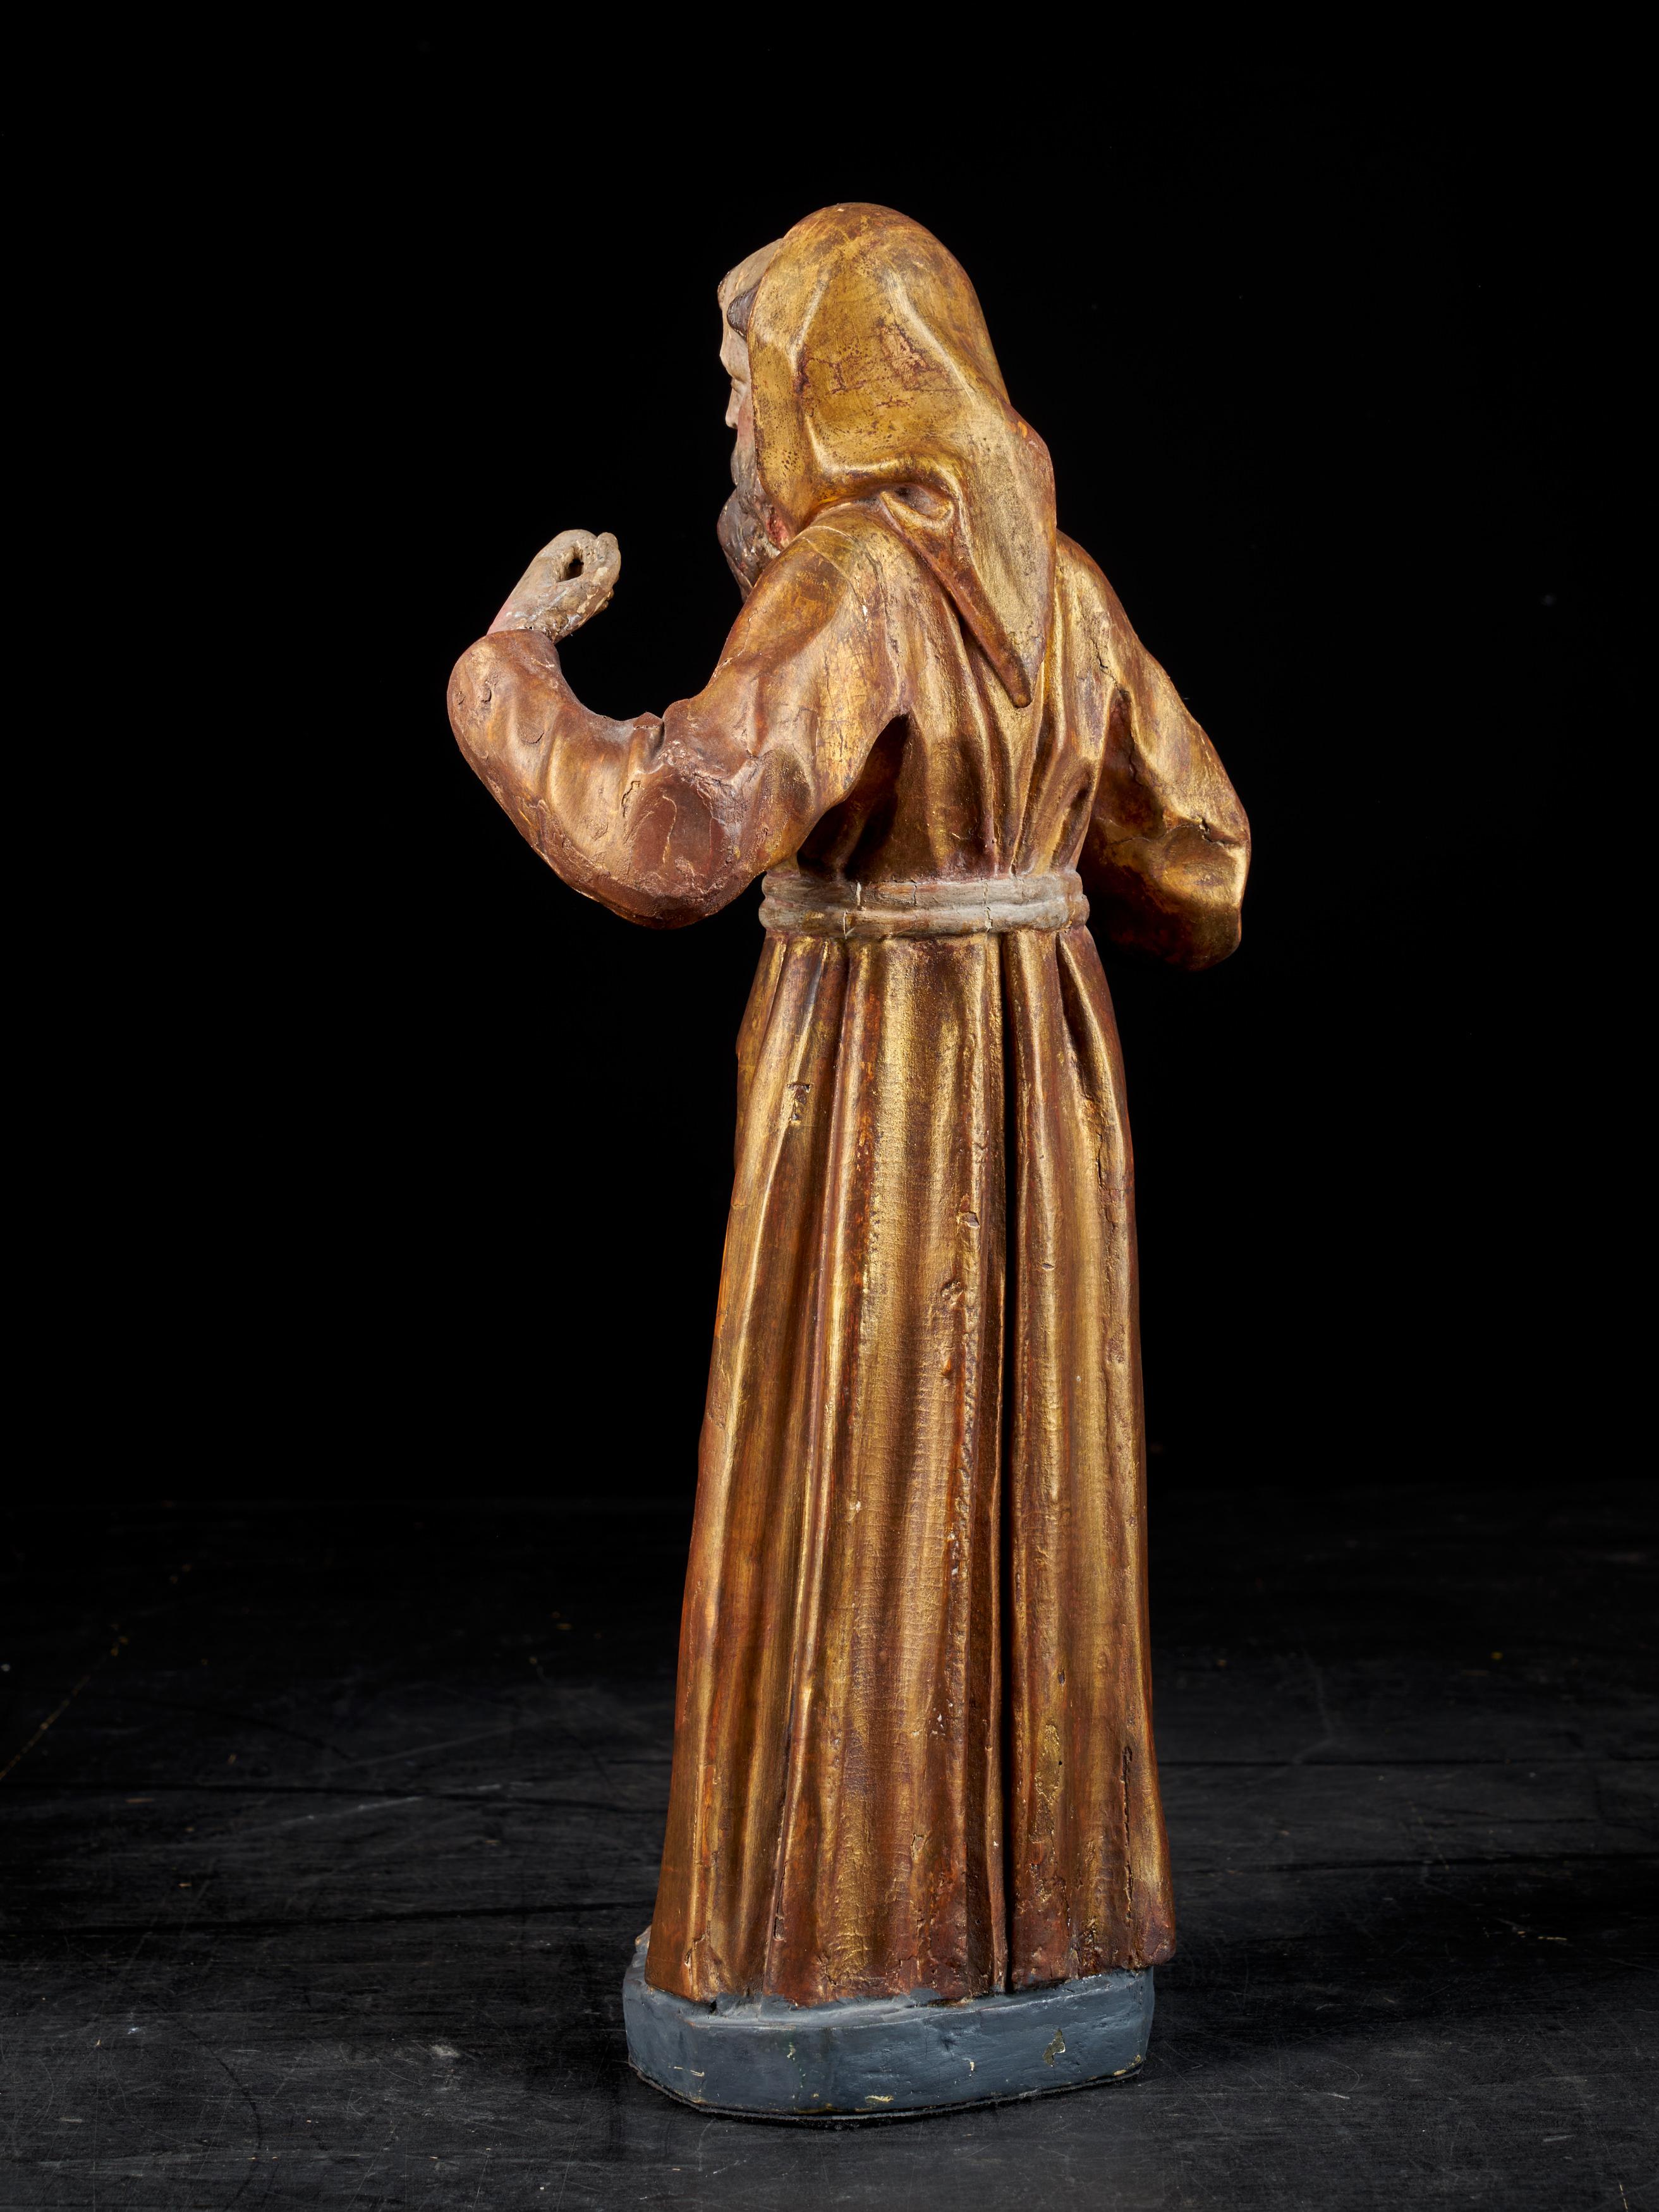 Gilt Wooden Statue of Saint-Francis with the Original Polychromy and Gilding